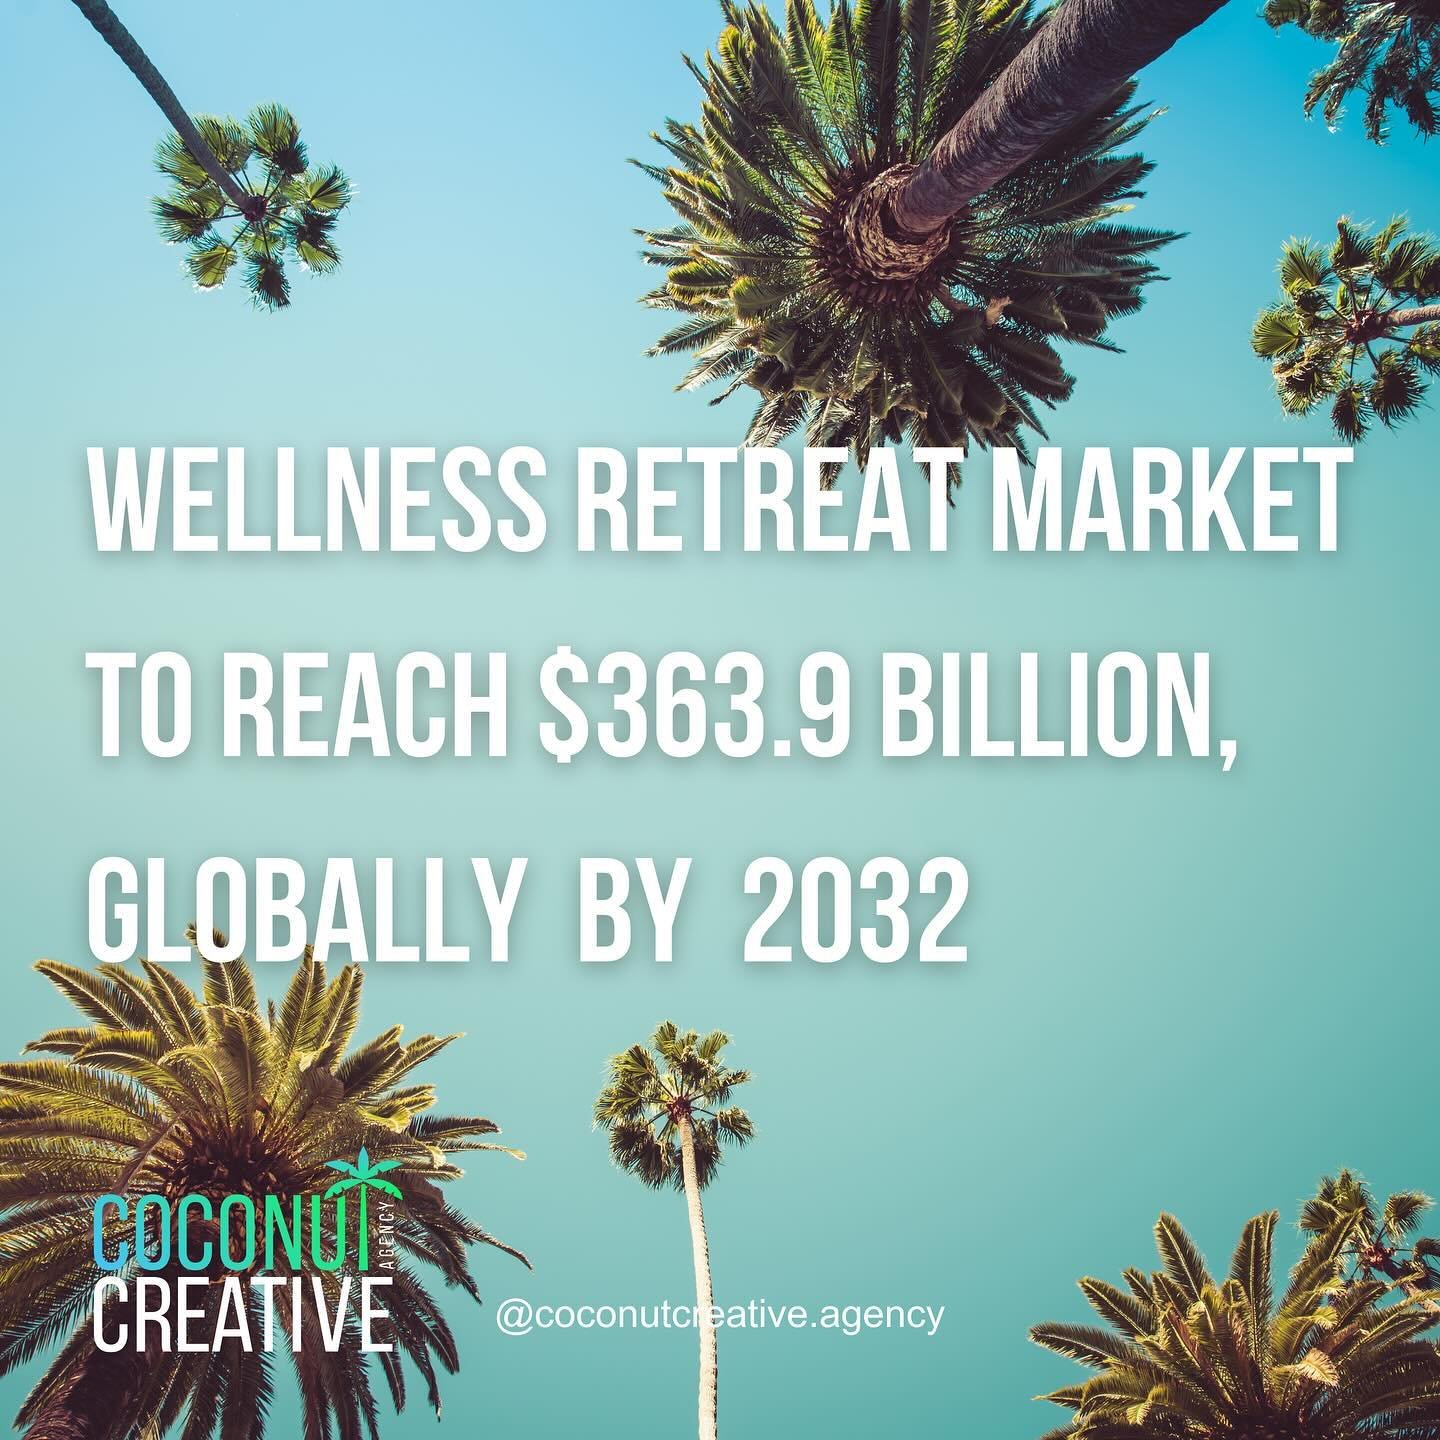 Yoga + Weekend Retreat + Beach = Biggest Wellness Tourism 💵 Dollars. 

Why not longer retreats? Turns out due to job, finance and time restrictions, weekend getaways are going to be in high demand.

Coconut Creative is a leader when it comes to show